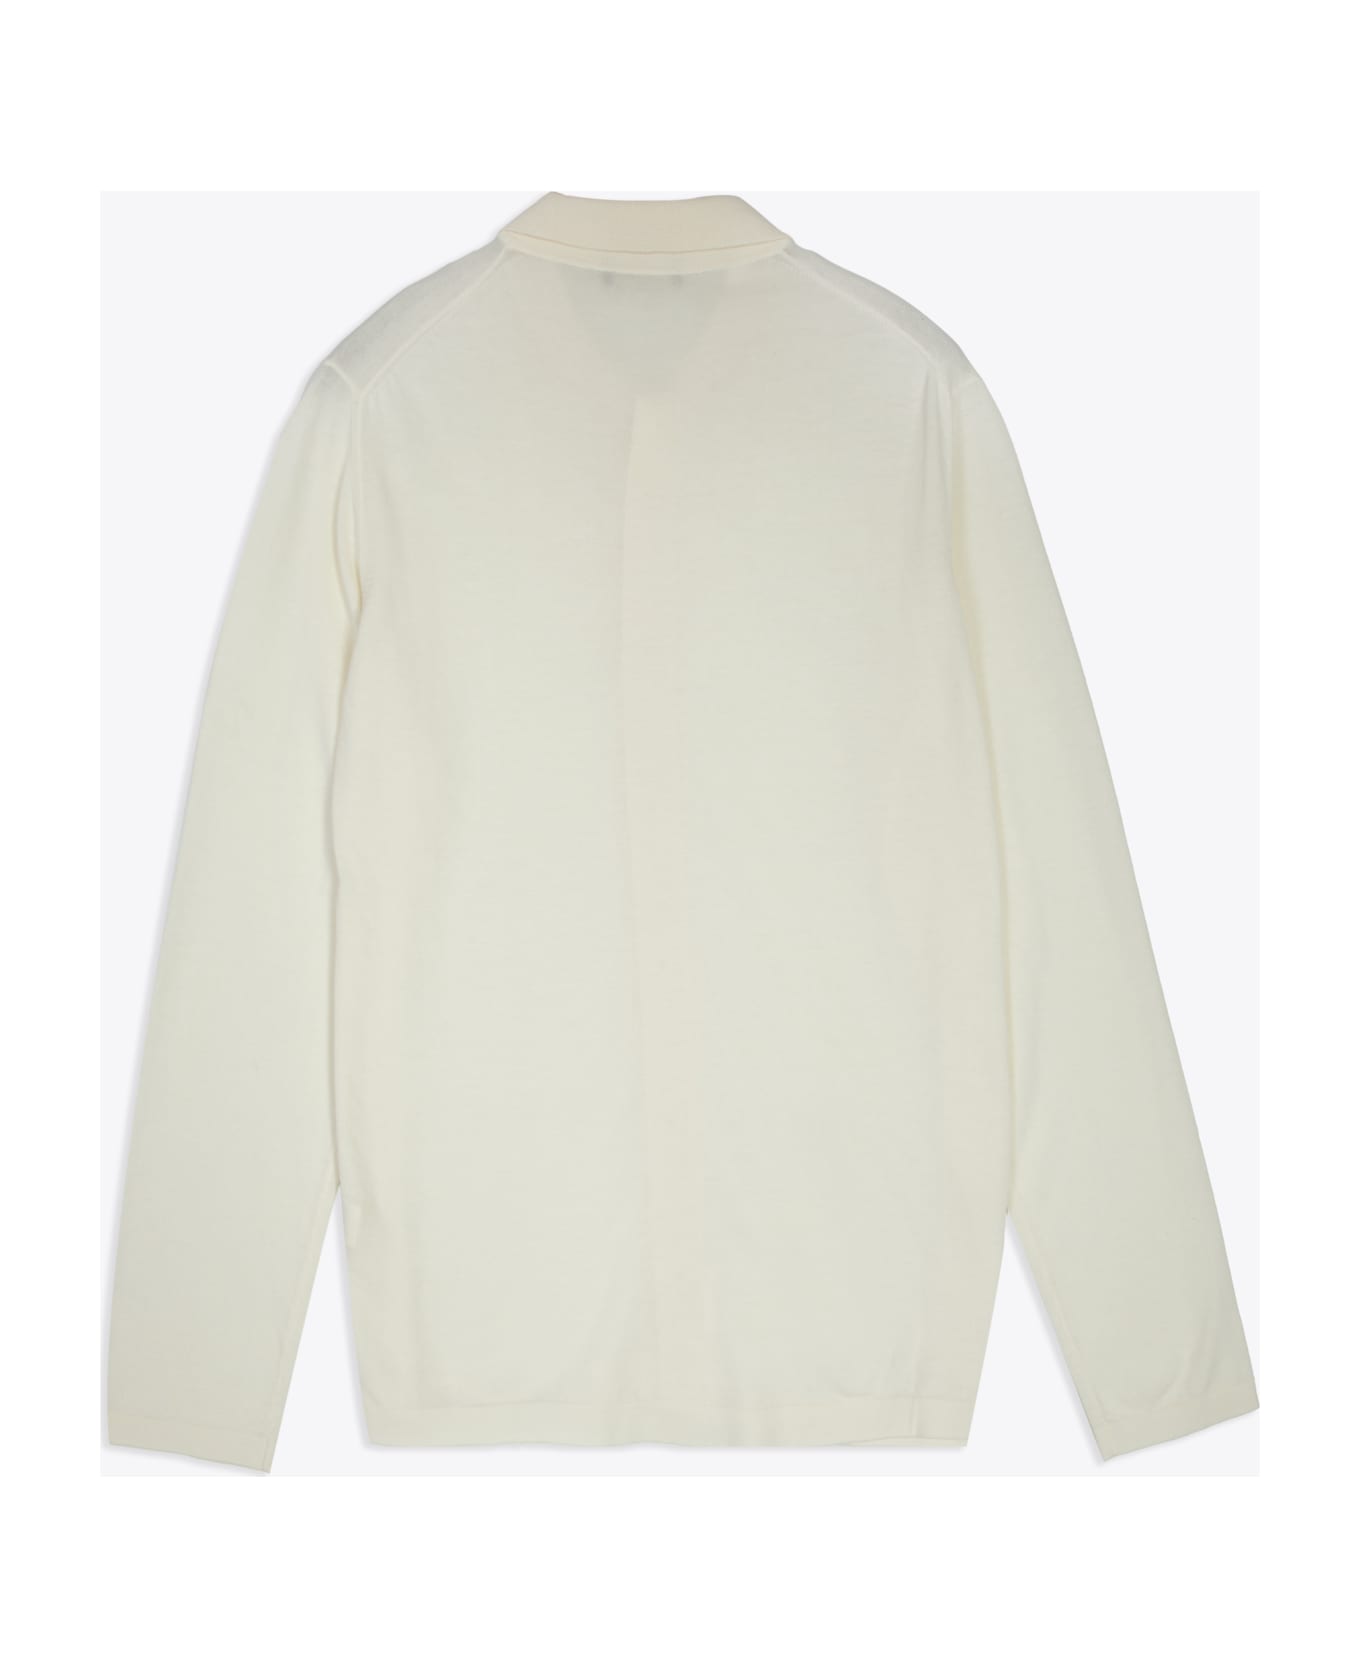 Roberto Collina Camicia Ml Off white cotton knit shirt with long sleeves - Latte